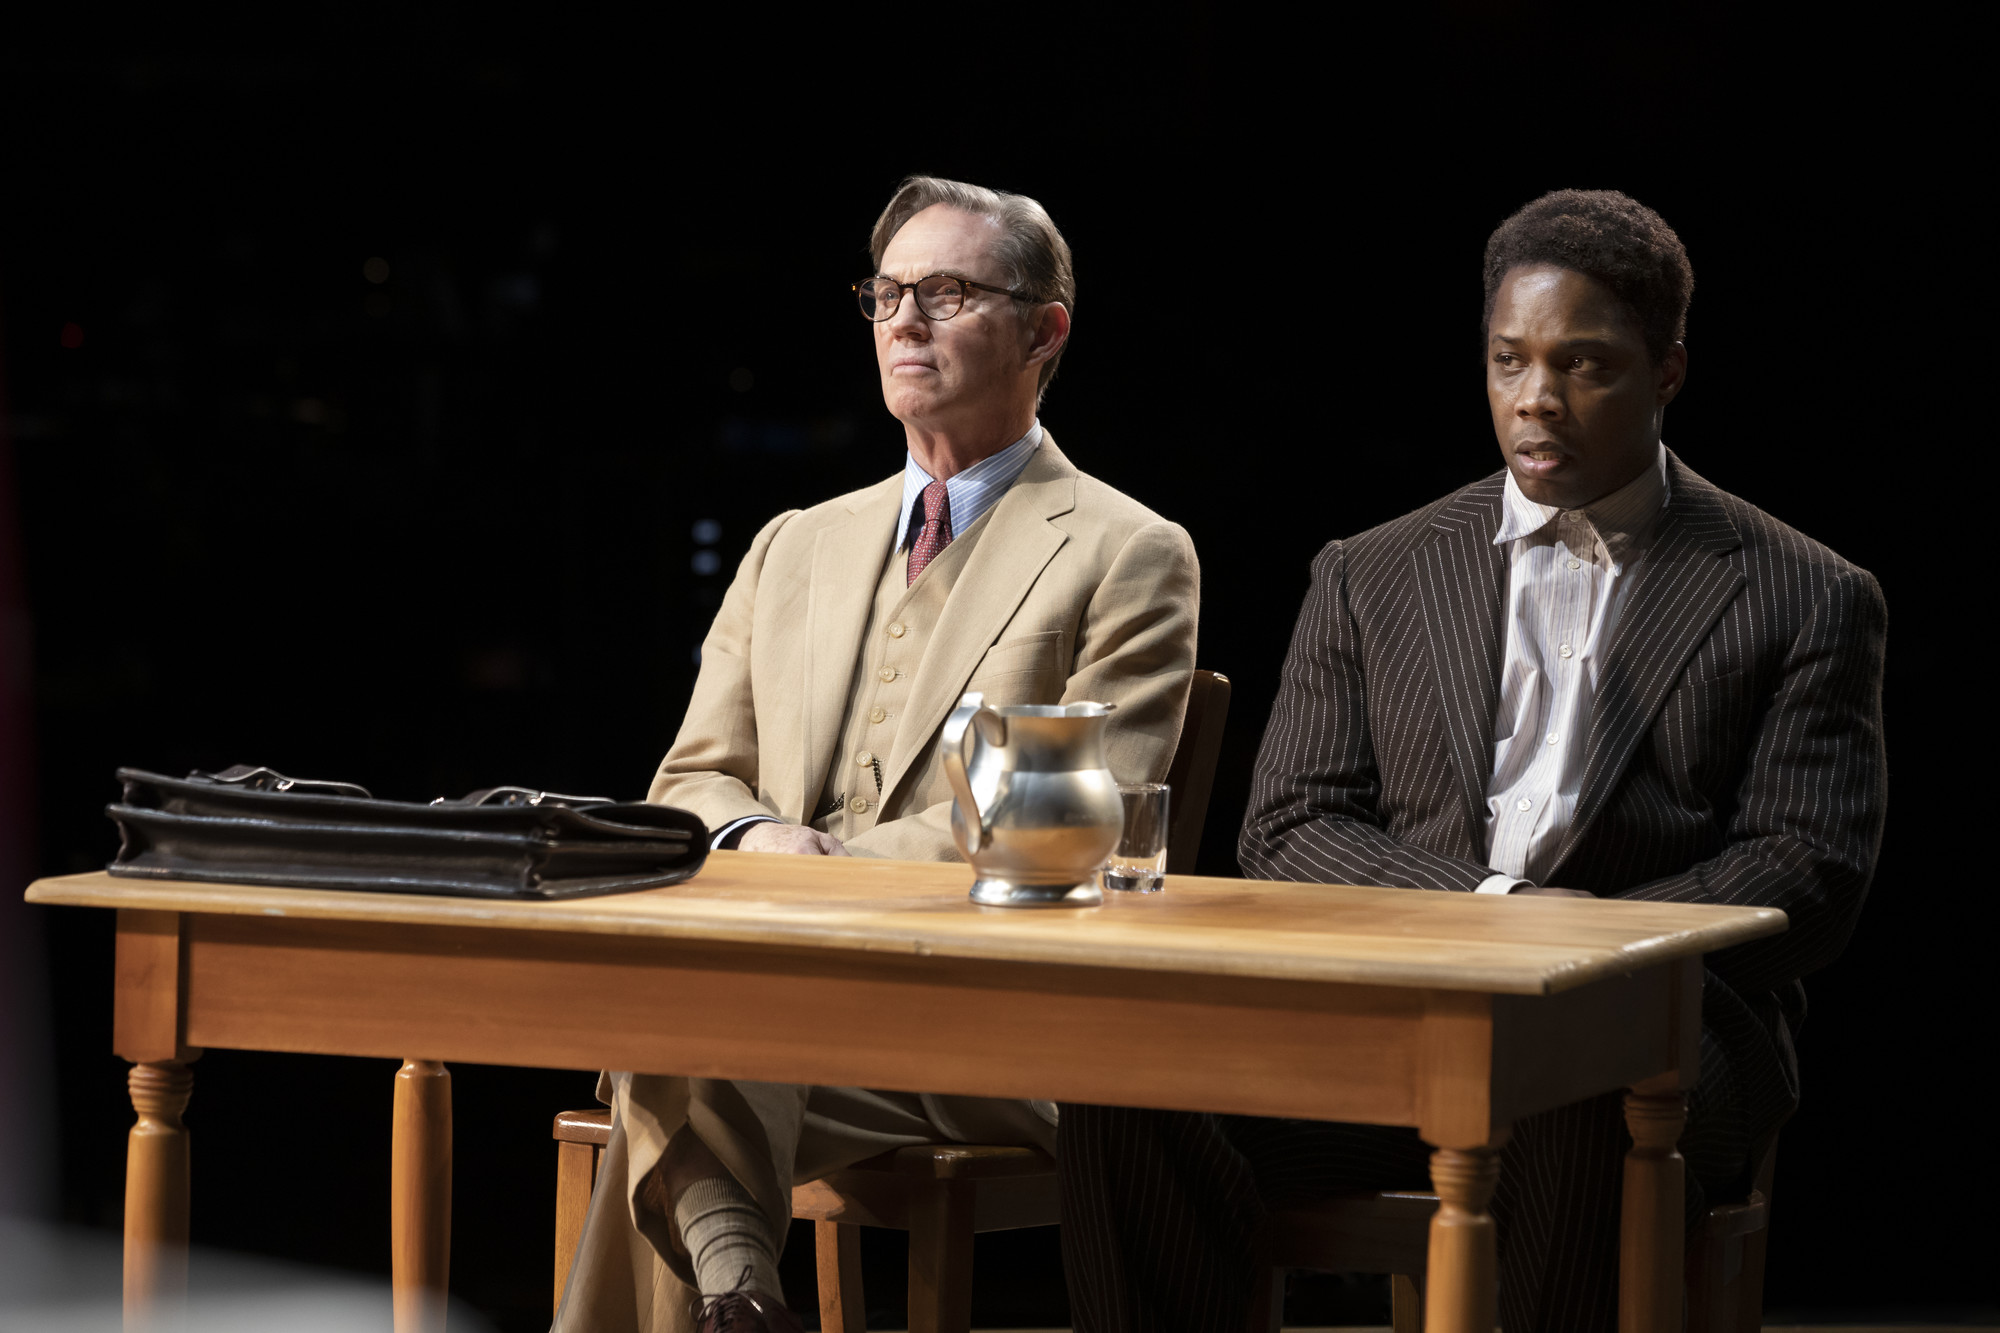 In the new 'To Kill a Mockingbird,' treatment of Black persons remains the central issue, but everything's not so black and white. The touring cast has Richard Thomas as Atticus Finch and Yaegel T. Welch as Tom Robinson. (photo: Julieta Cervantes)